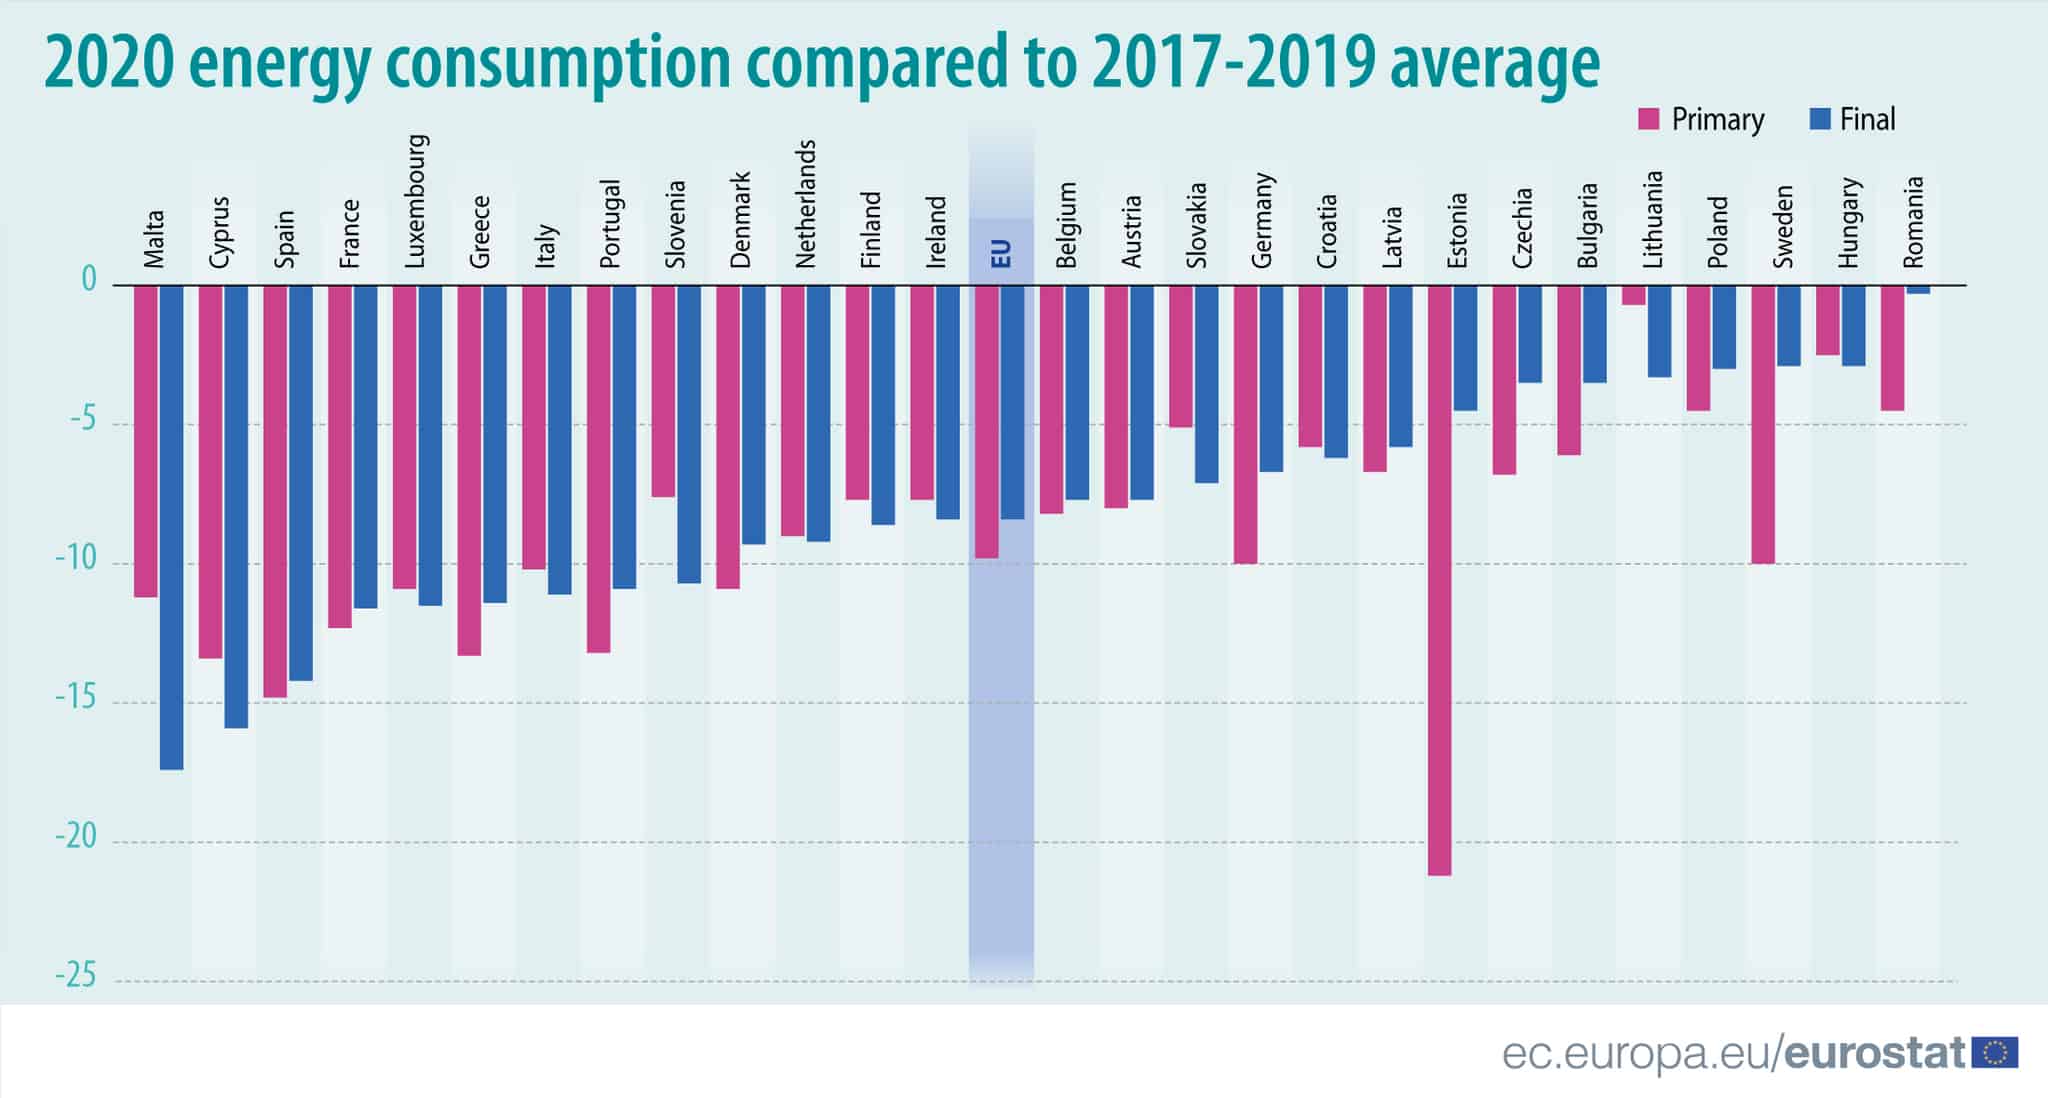 Greece and Cyprus see massive drop in energy consumption 2